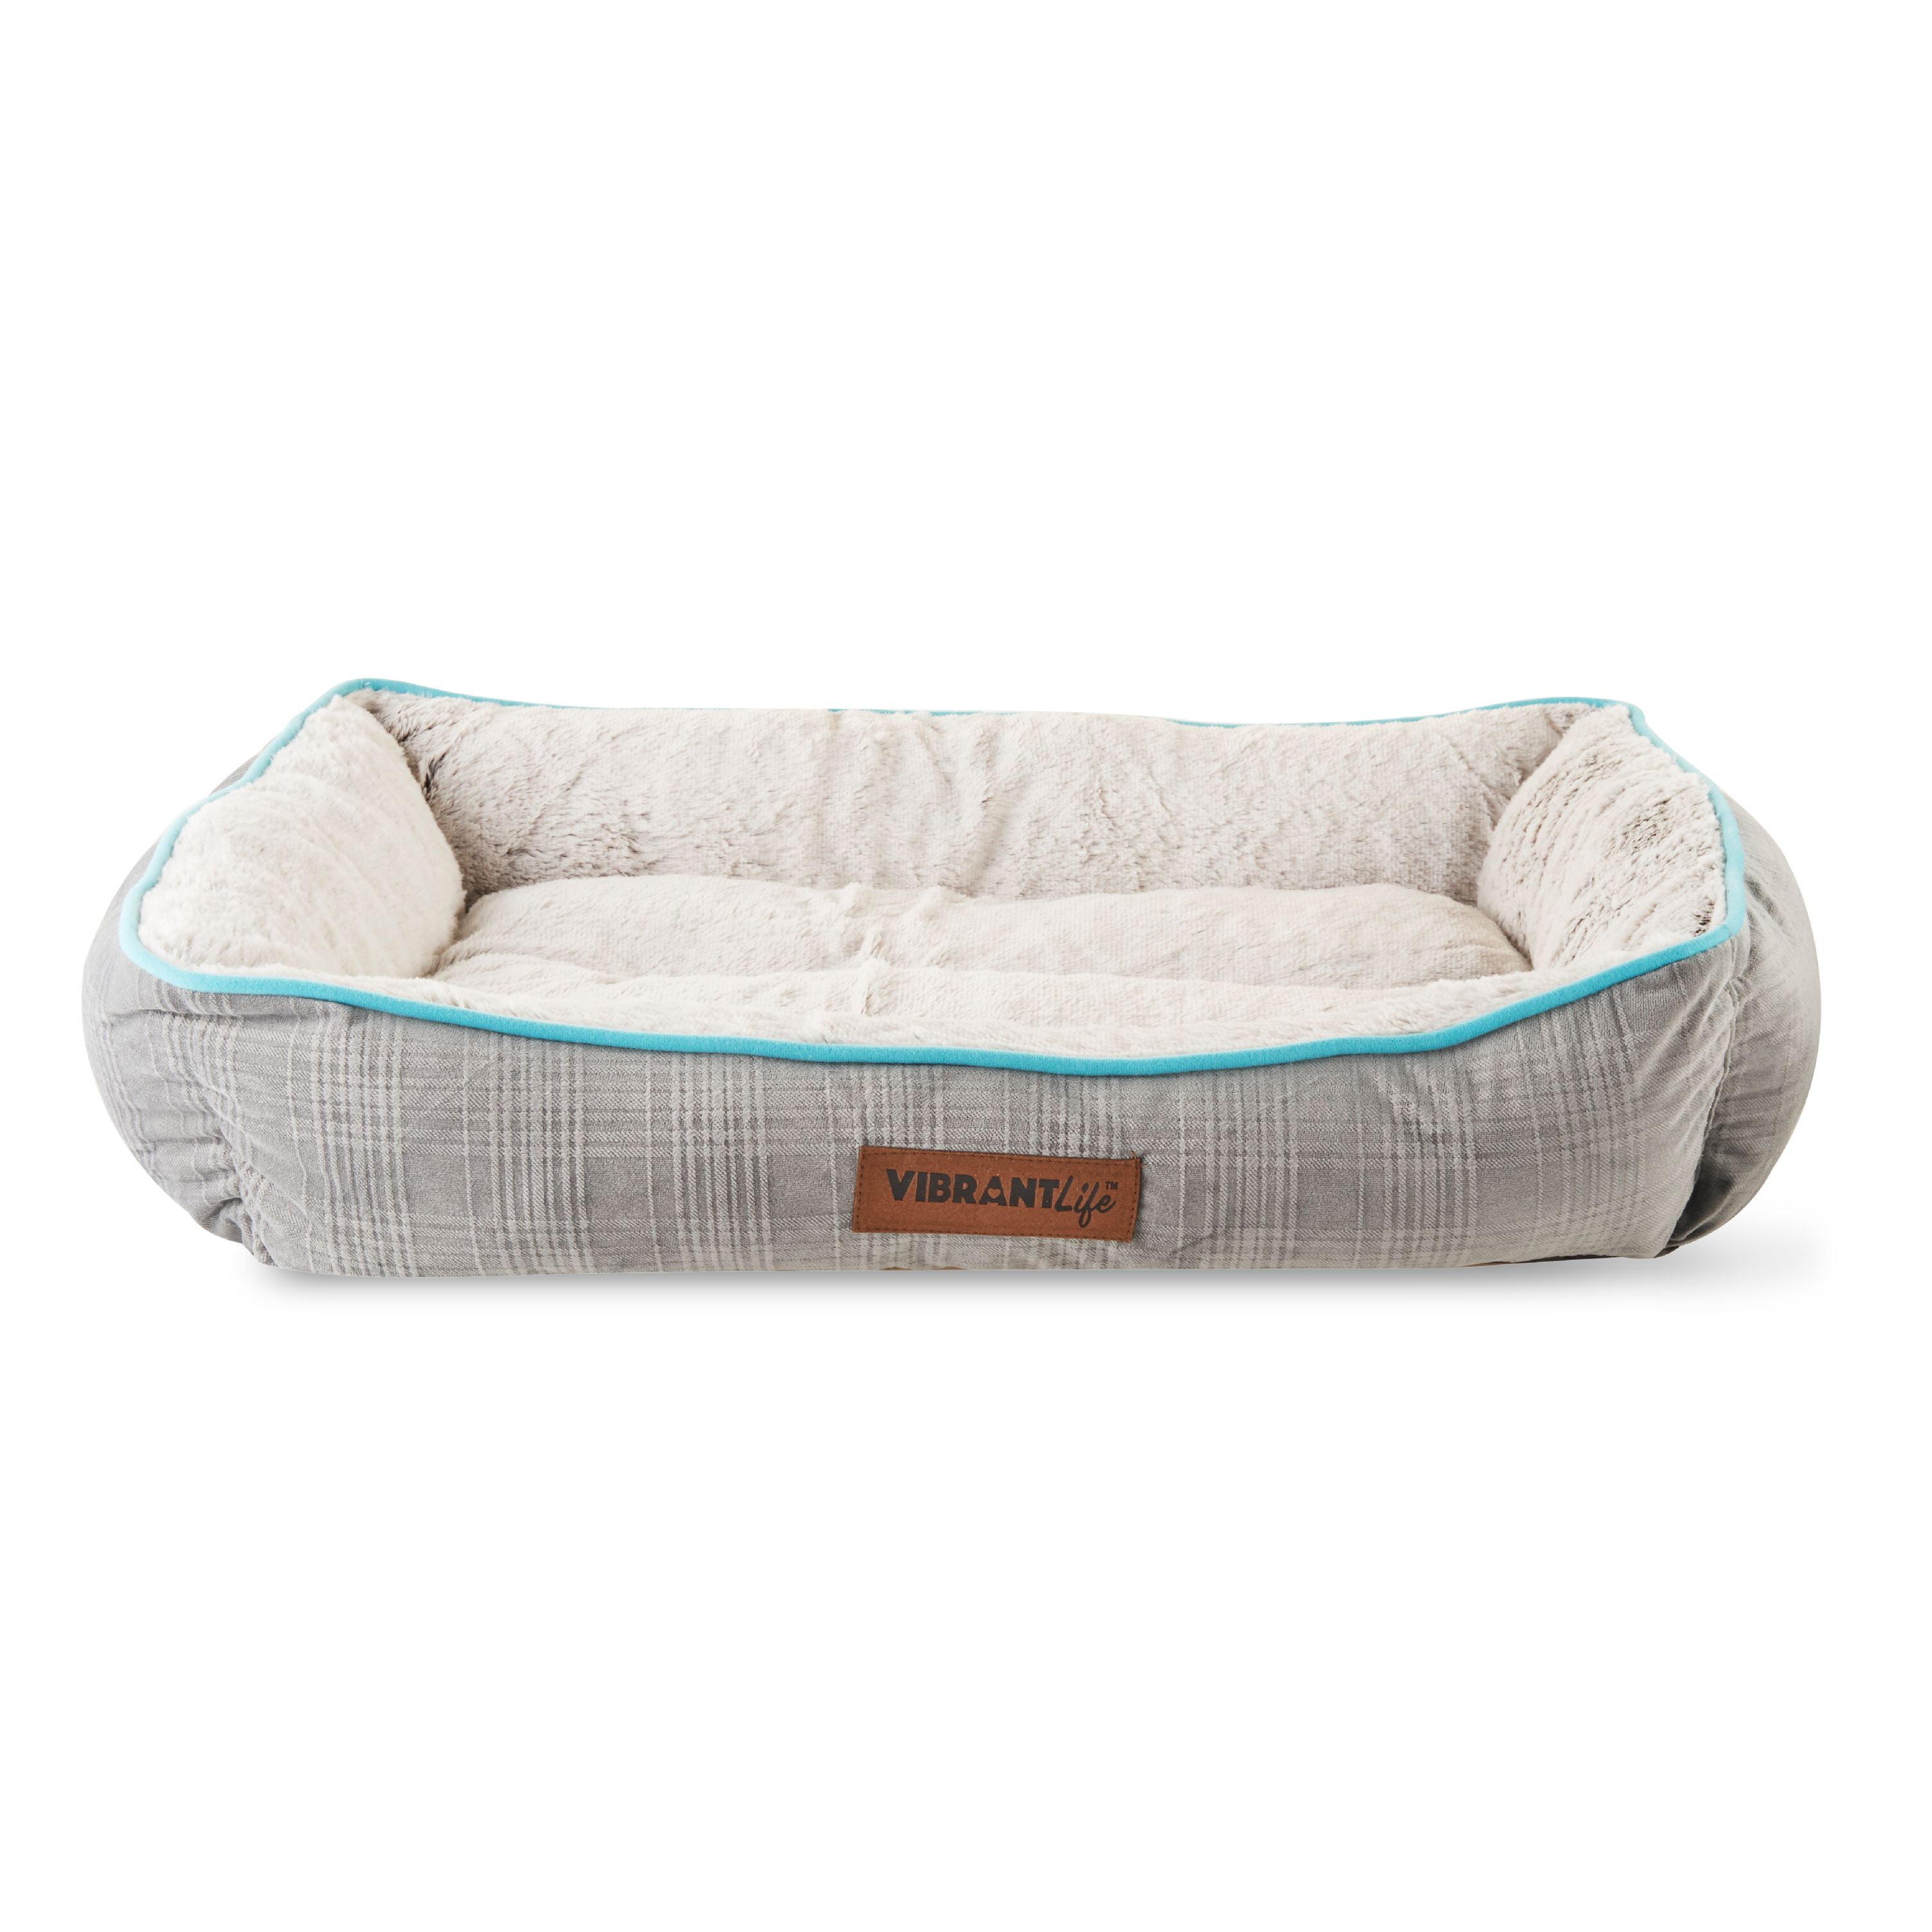 Vibrant Life Luxe Cuddler Pet Dog Bed 